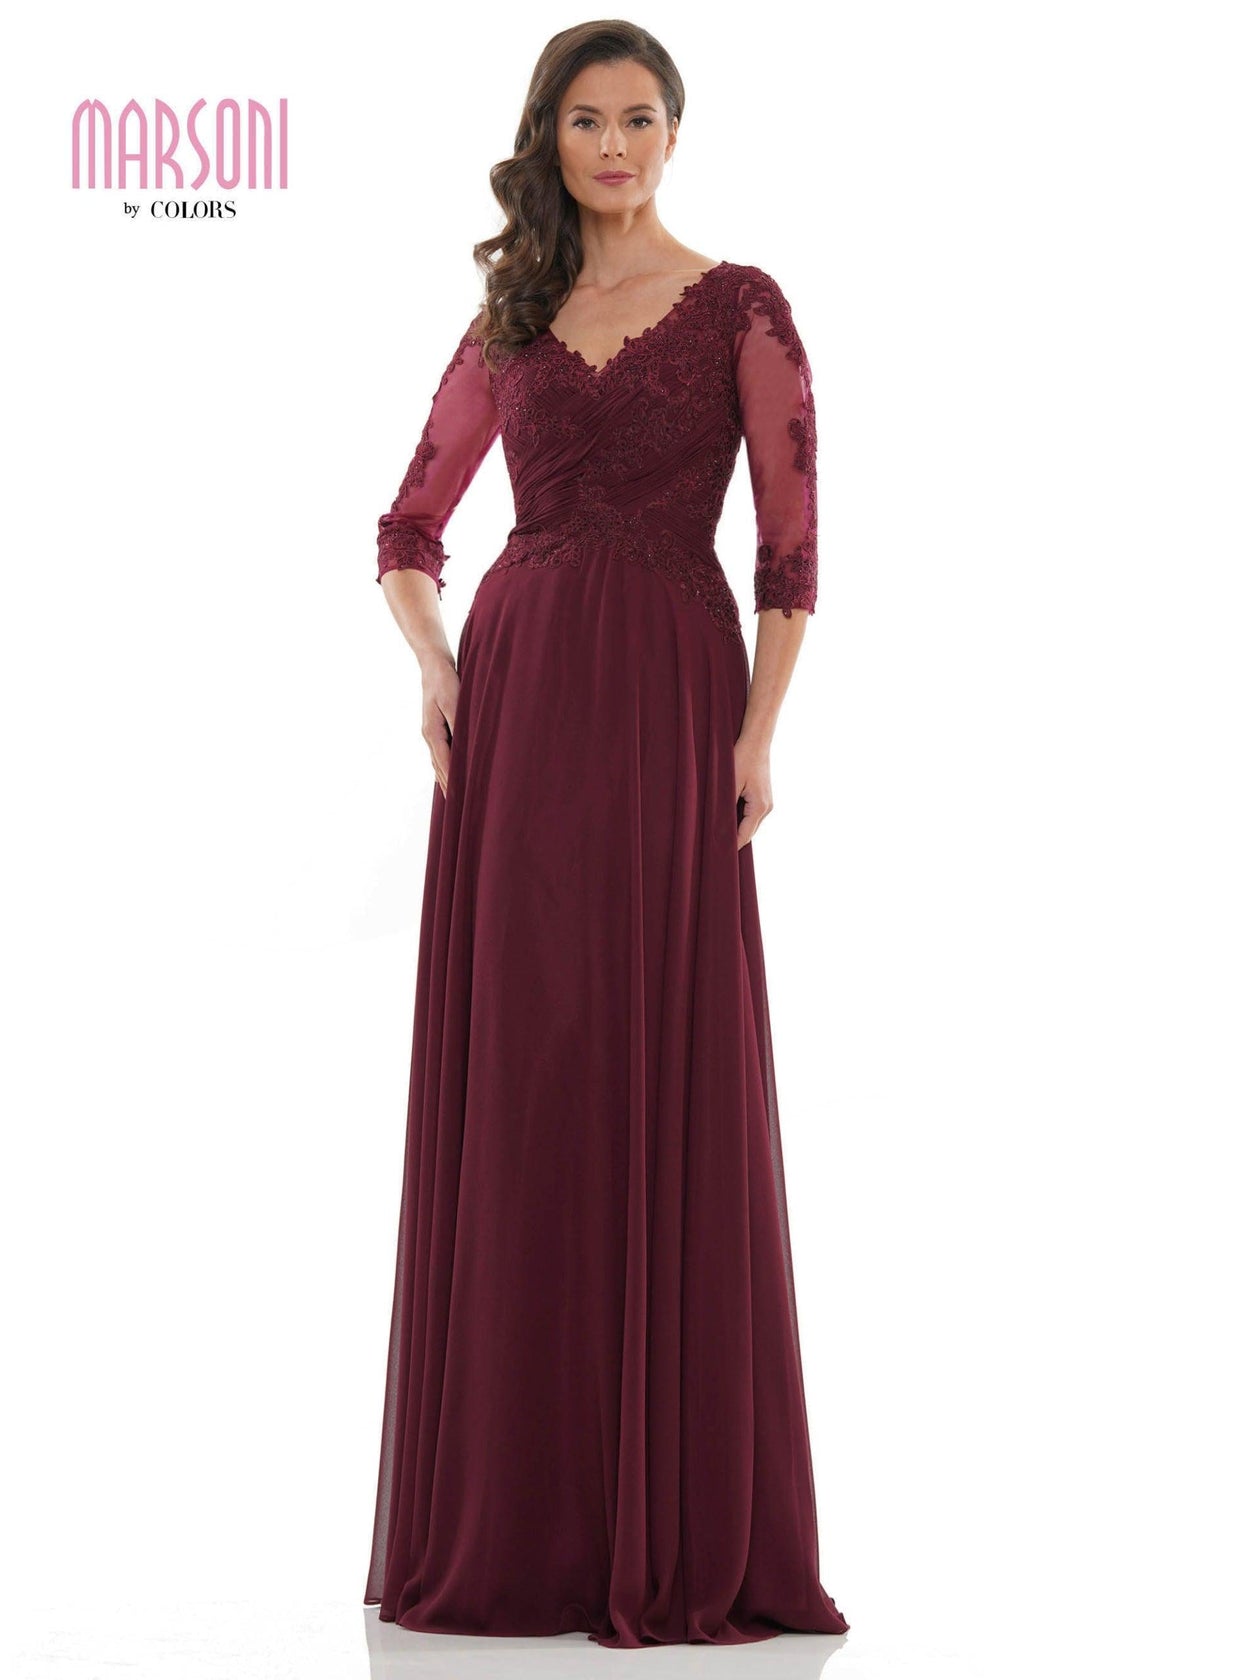 Get Long Sleeve Mother of Bride Dresses here at - The Dress Outlet